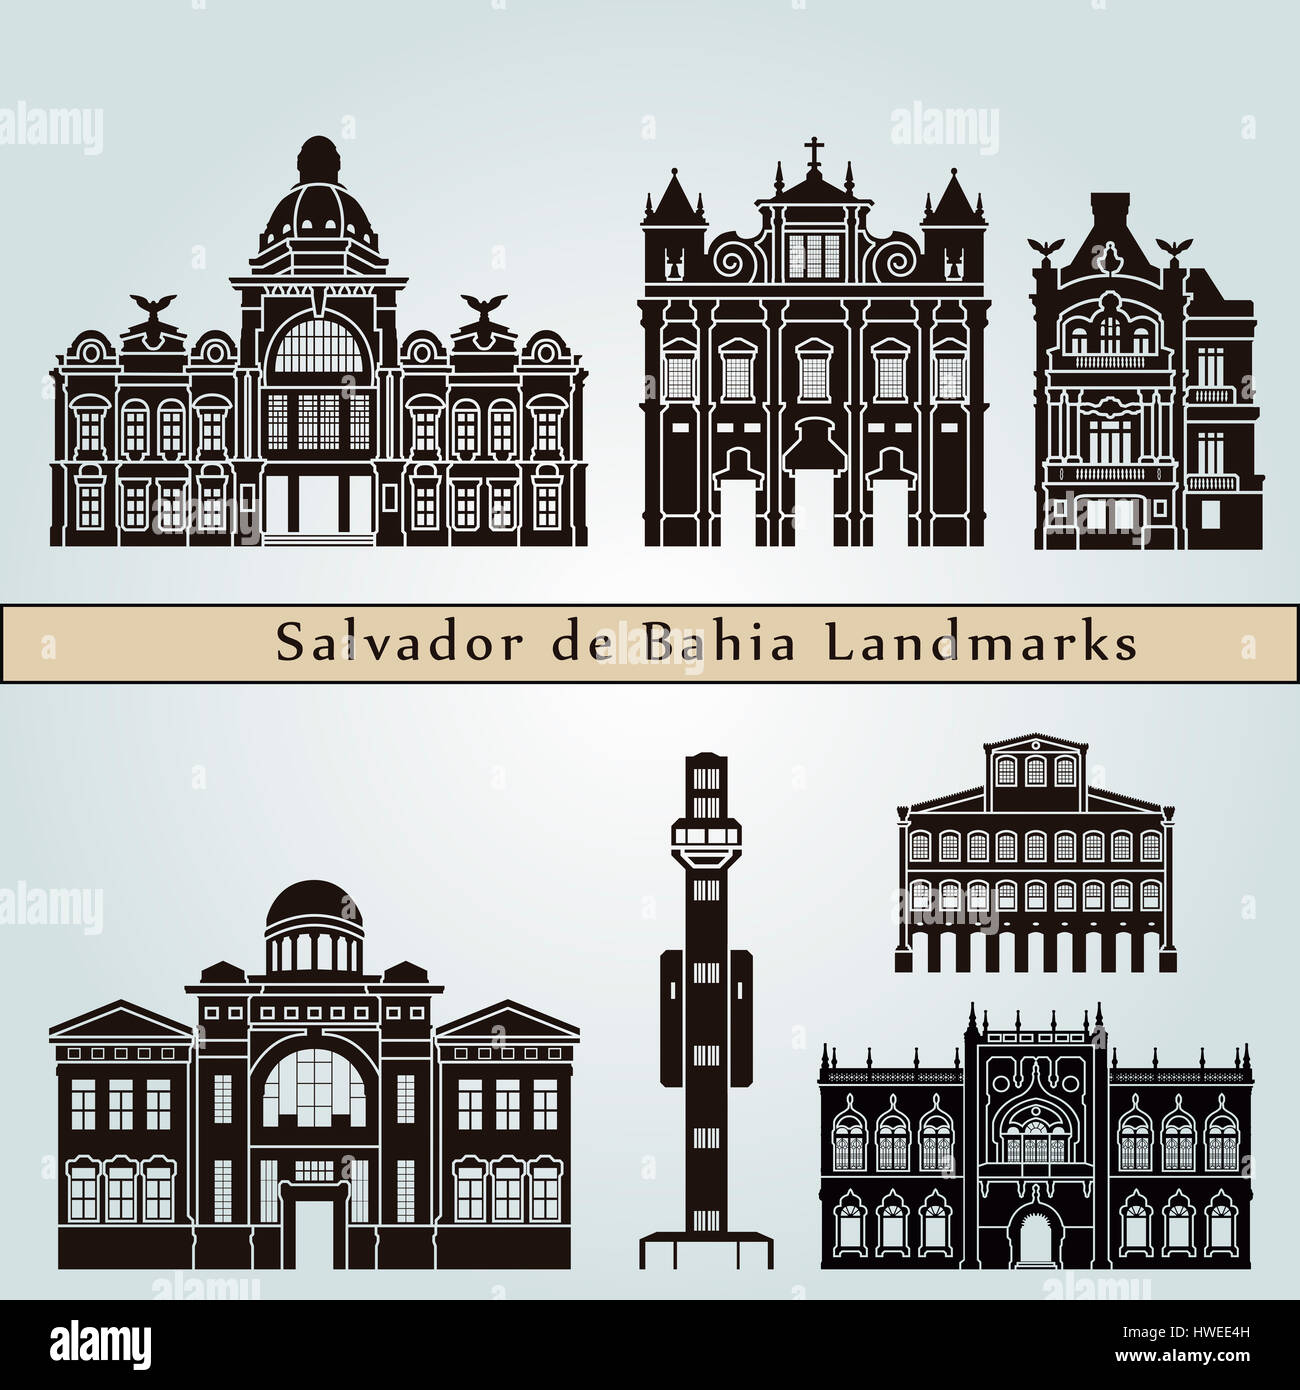 Salvador de Bahia landmarks and monuments isolated on blue background in editable vector file Stock Photo